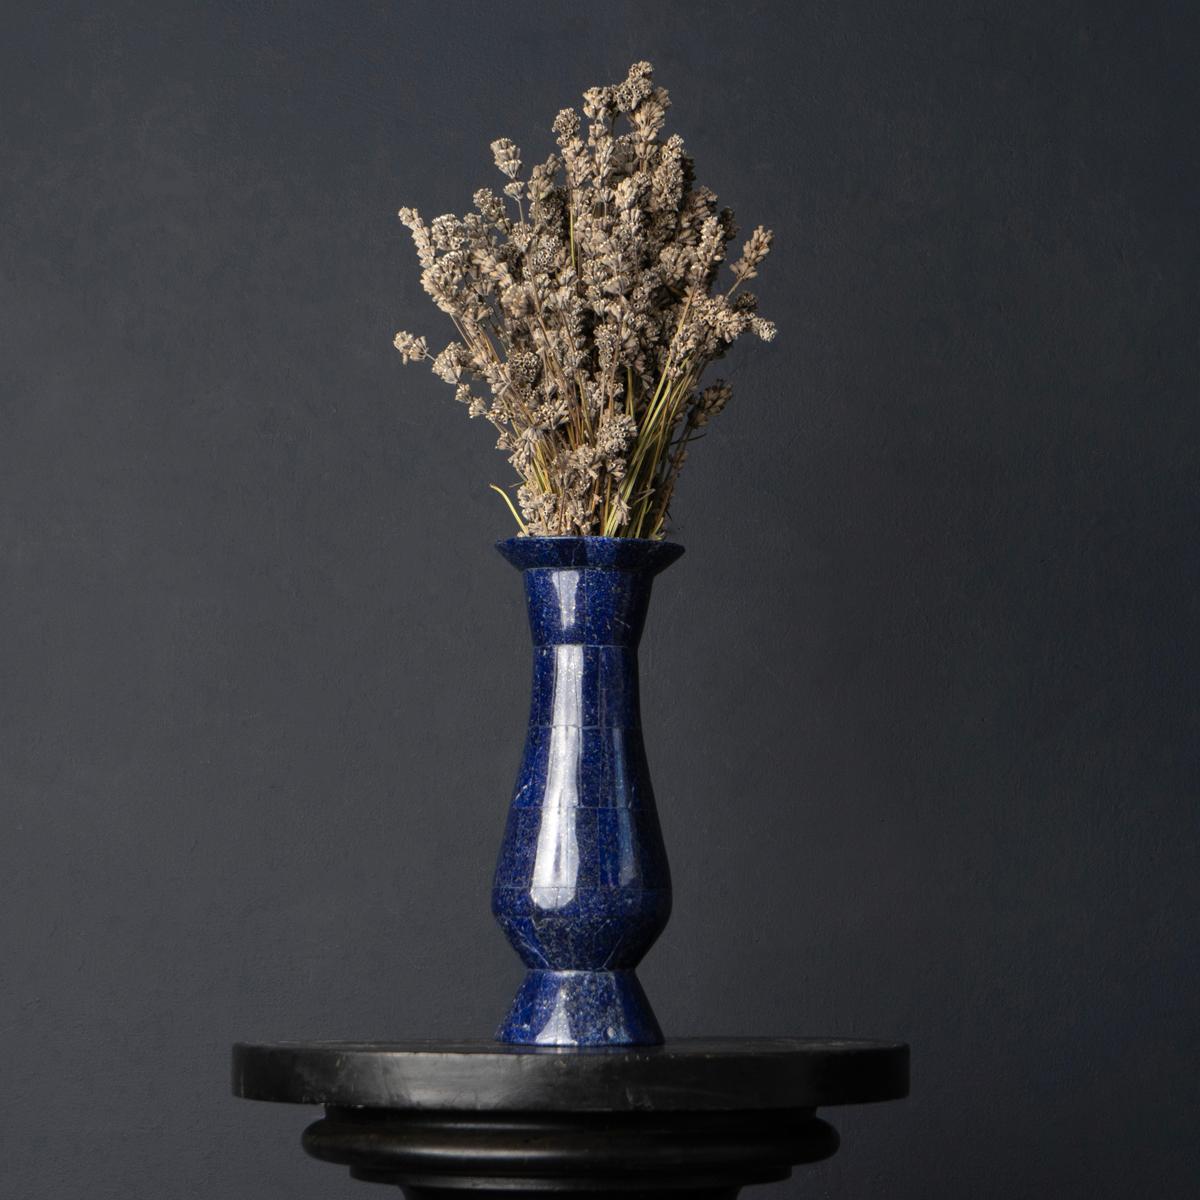 Semi-precious stone vase.
Stunning deep blue natural lapis lazuli stone with sparkly gold pyrite inclusions.

Skilfully handcrafted cutting and polishing each stone into the overall baluster form.

Dating from the early-mid 20th century.

It